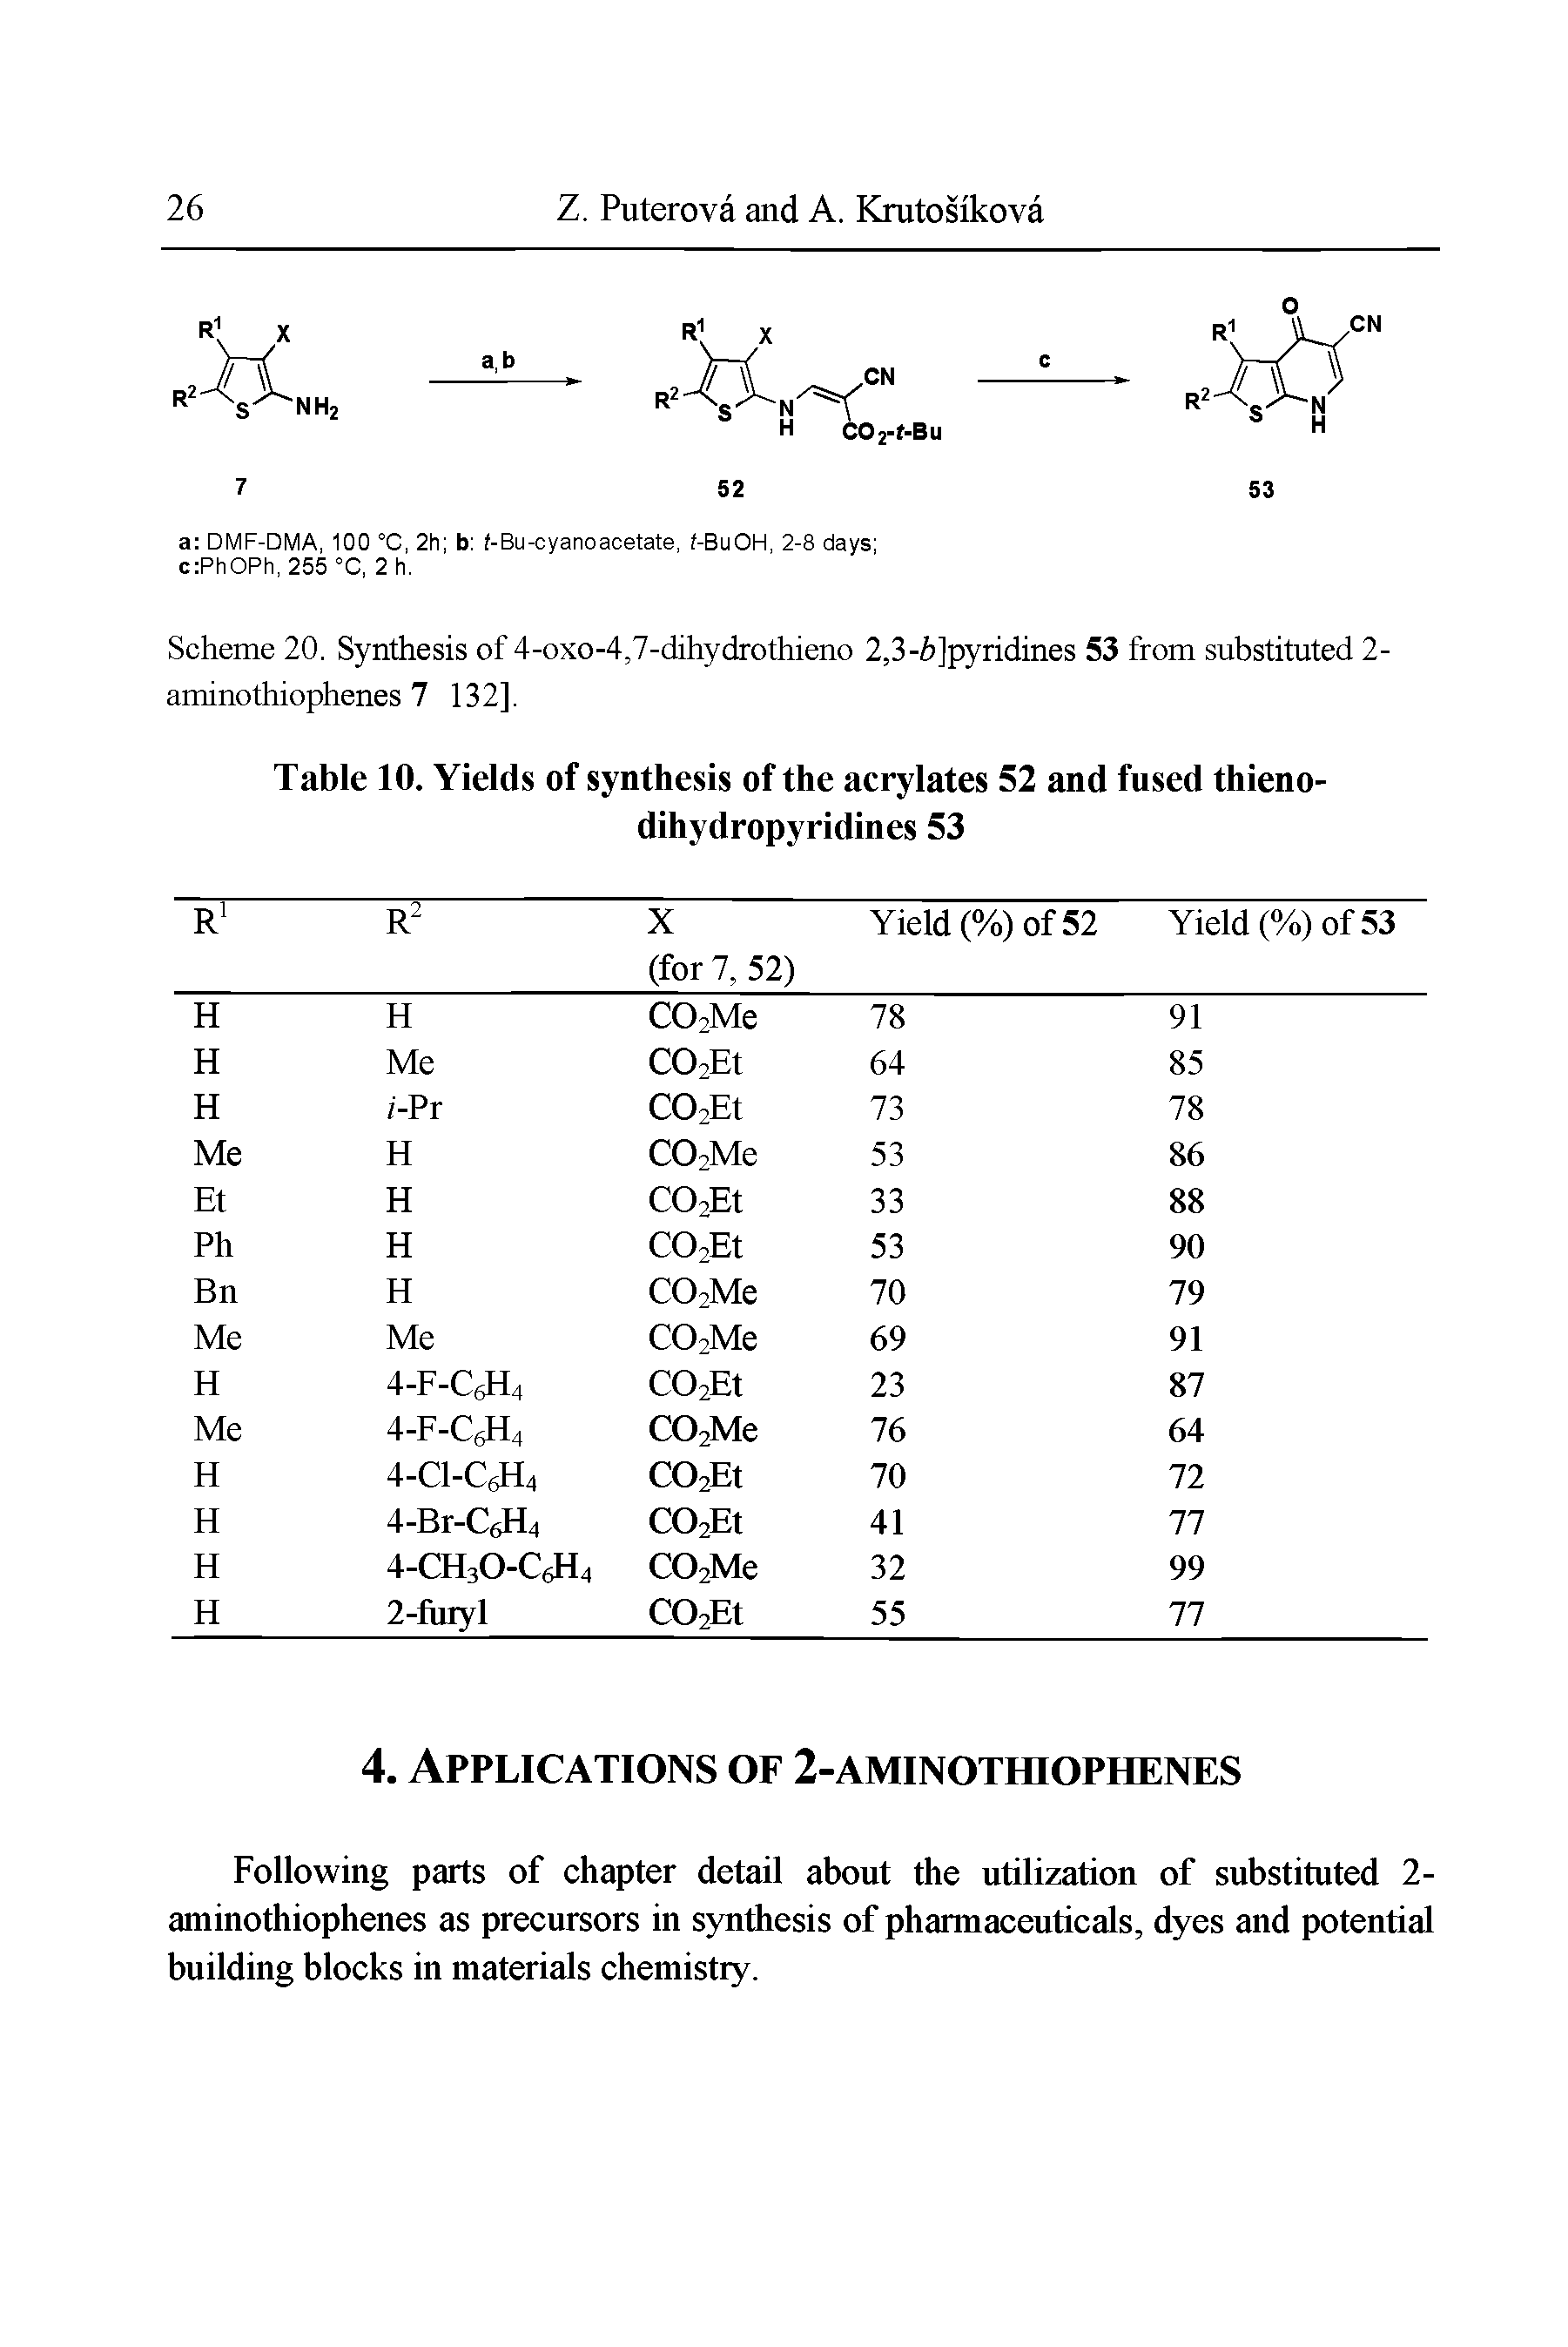 Table 10. Yields of synthesis of the acrylates 52 and fused thieno-dihydropyridines 53...